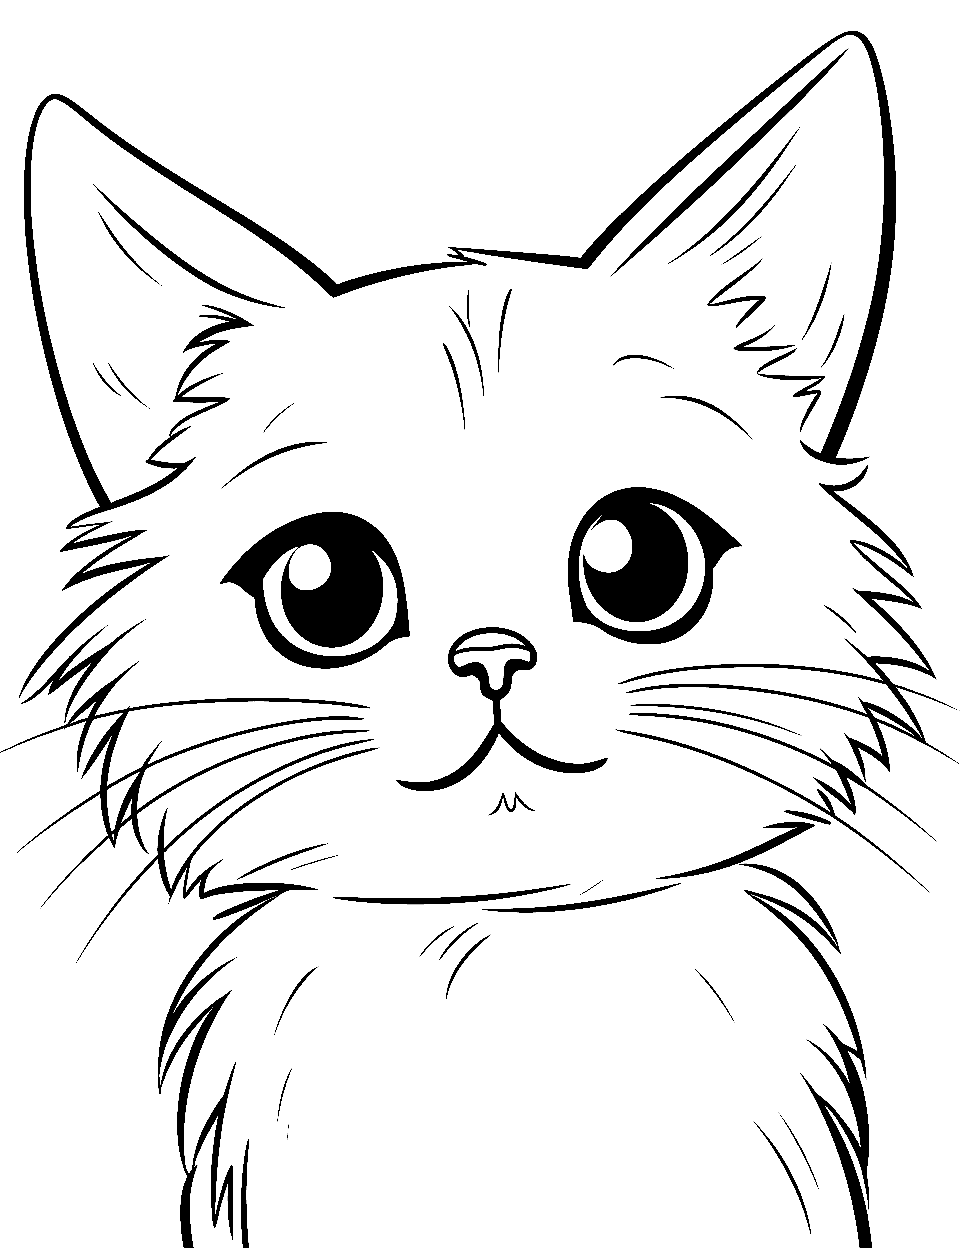 Kitty's Whisker Twitch Coloring Page - Close-up of a kitten’s face, with twitching whiskers.